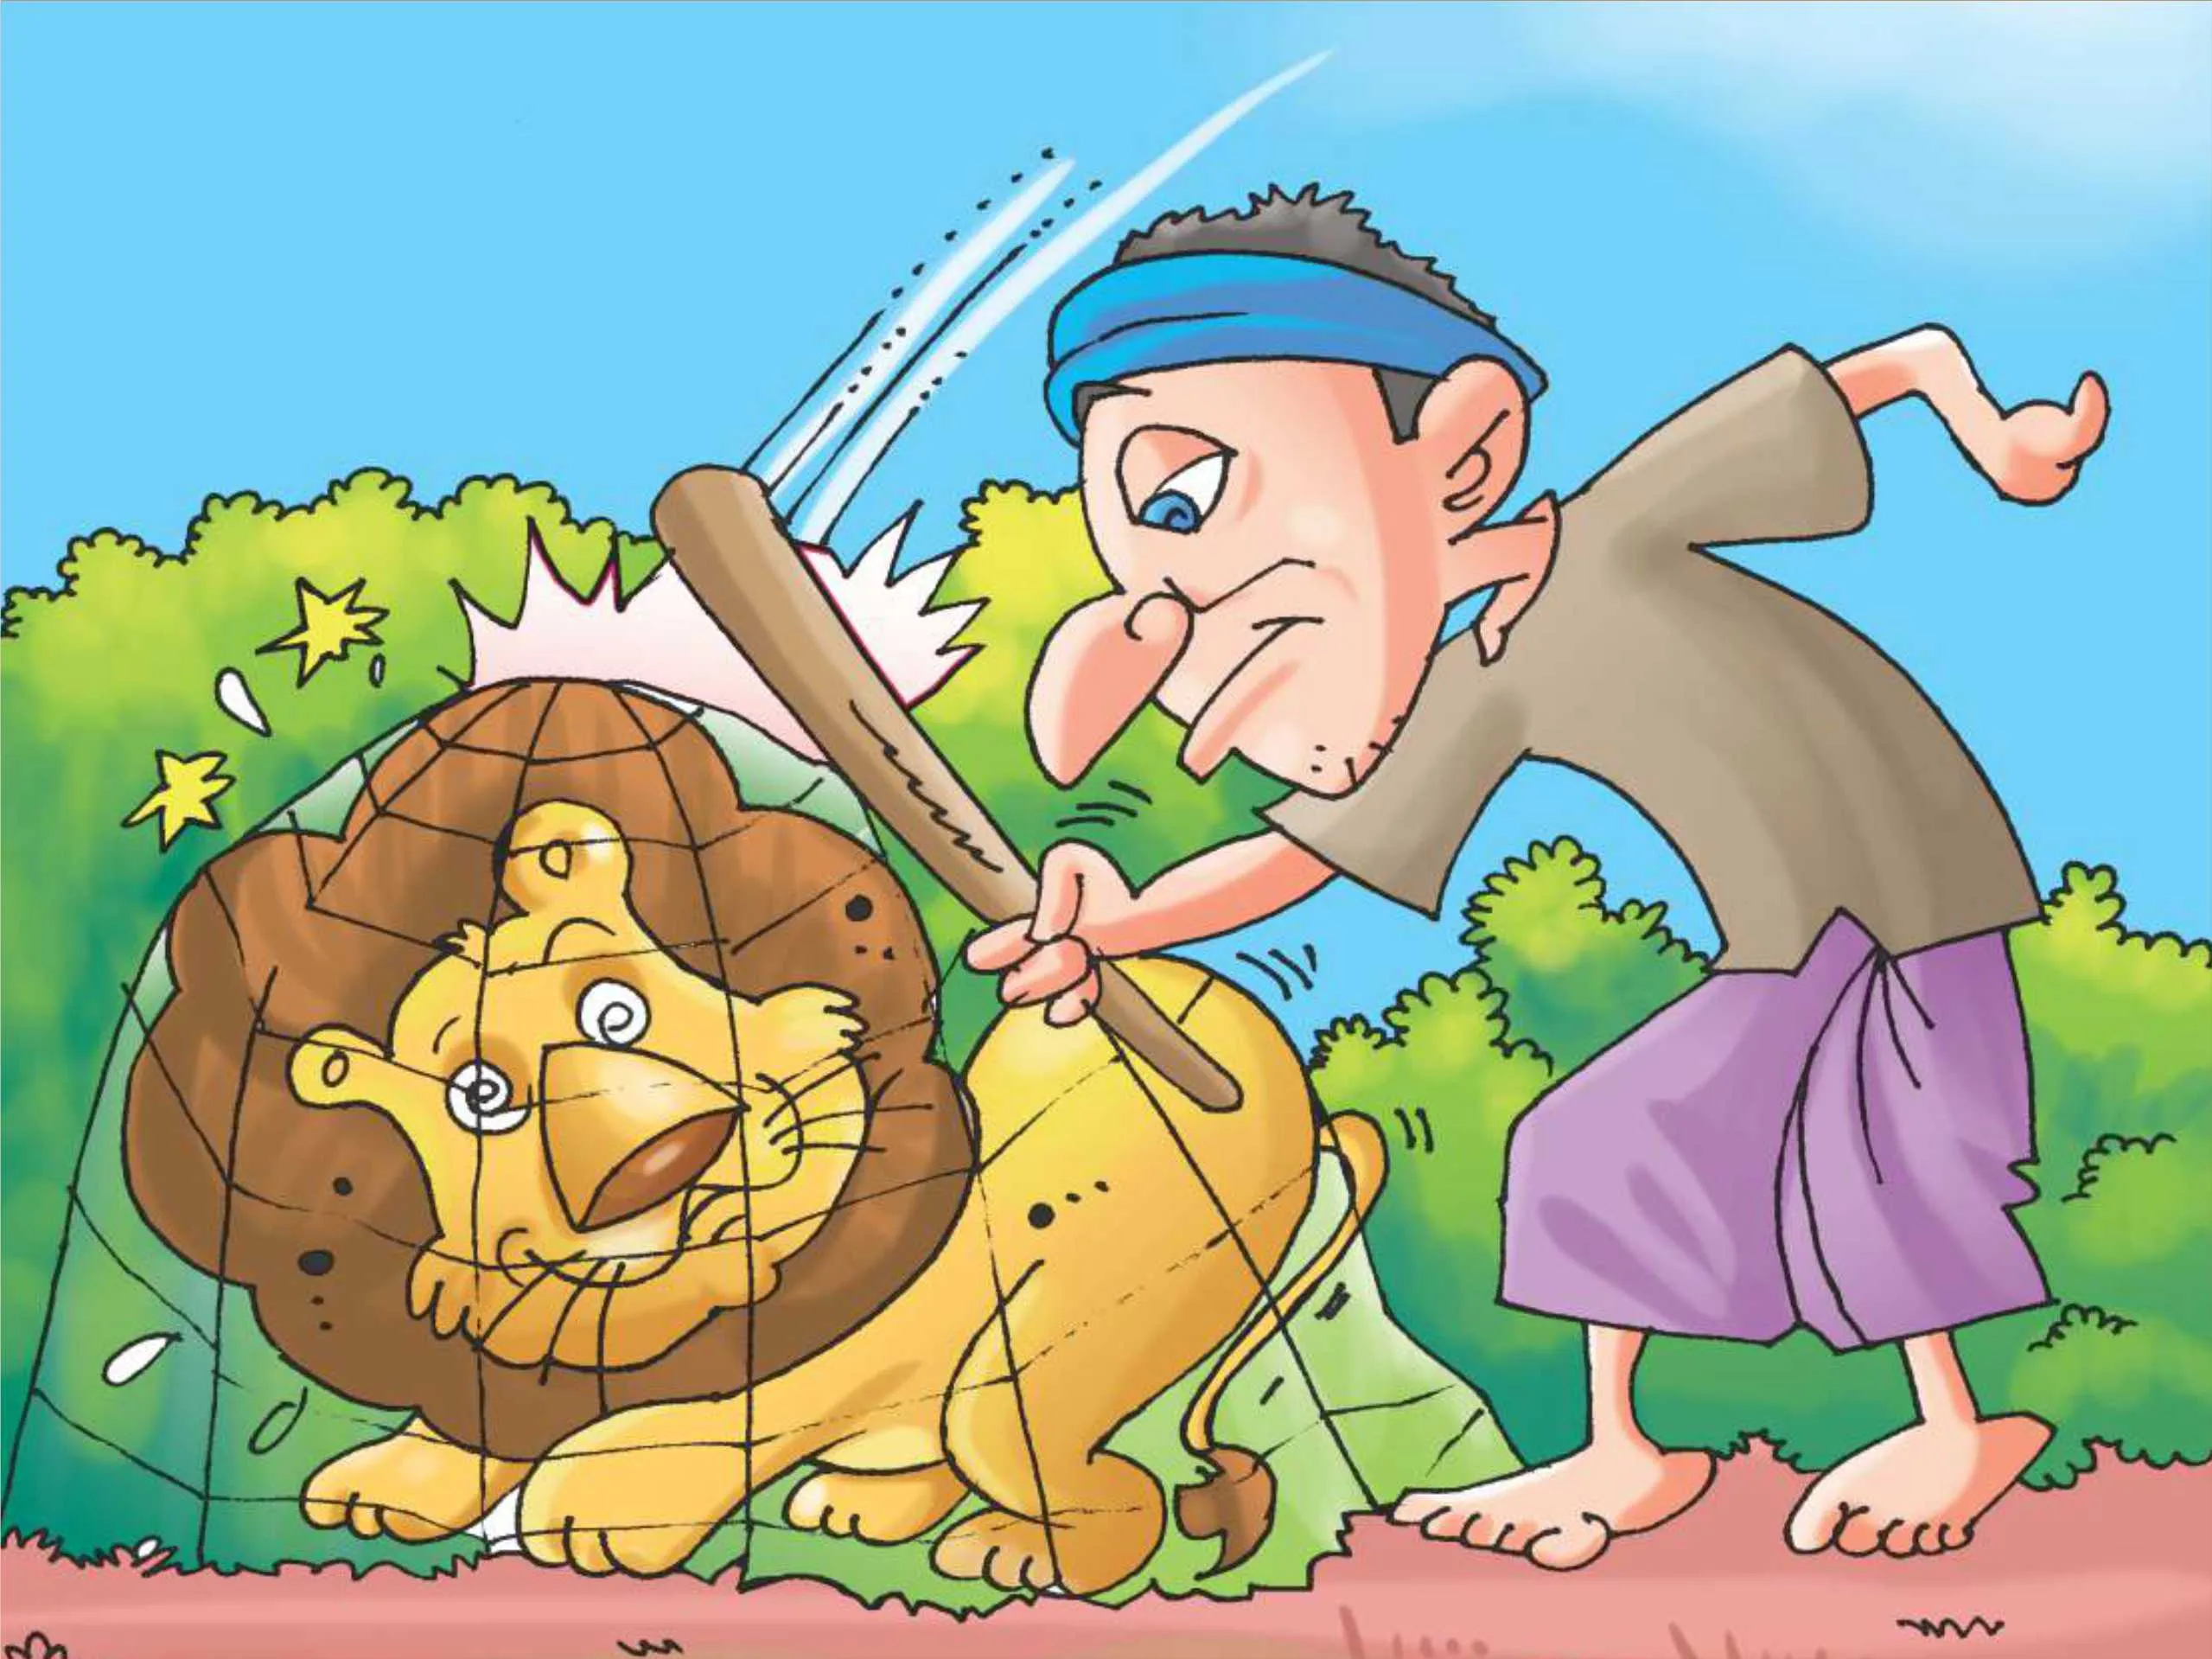 Lion trapped in nets and beaten by man cartoon image